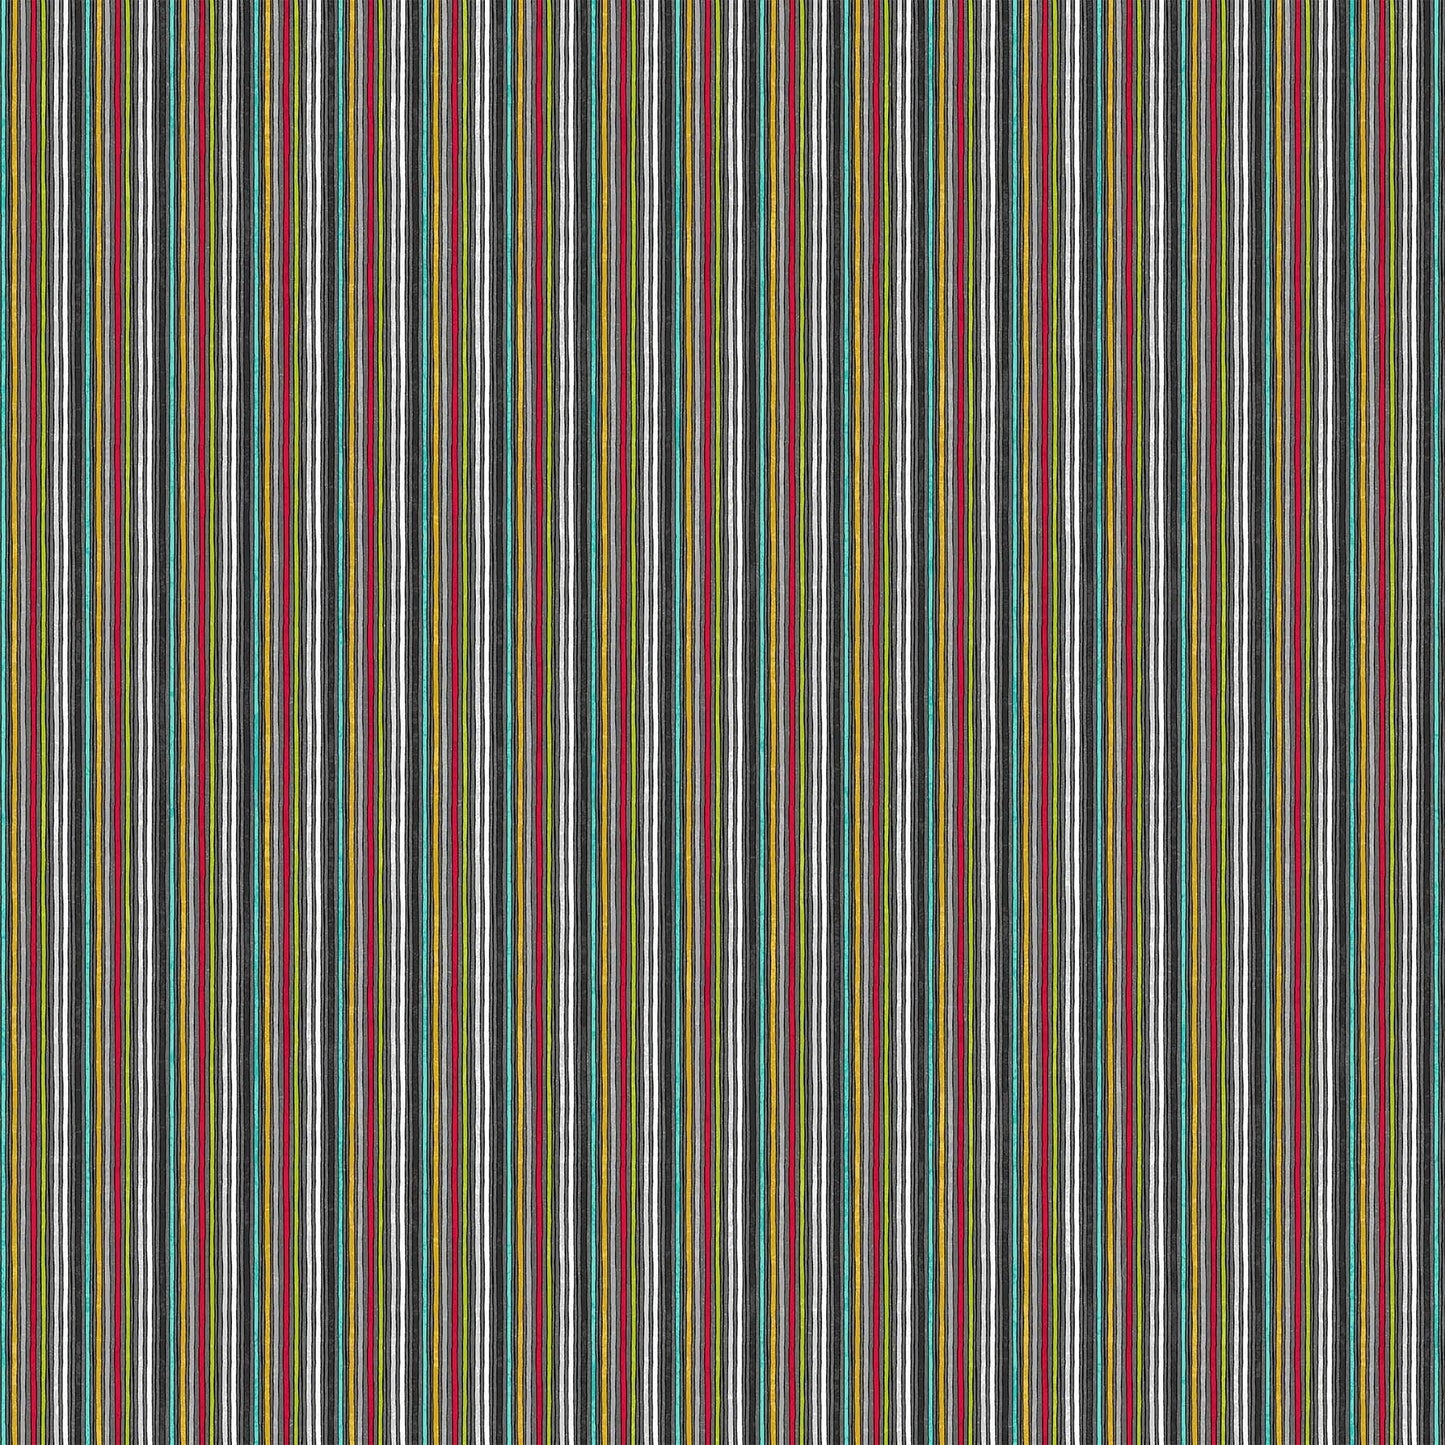 Sewing is my Happy Place by Nina Djuric Barcode Stripe 24223-99 Cotton Woven Fabric